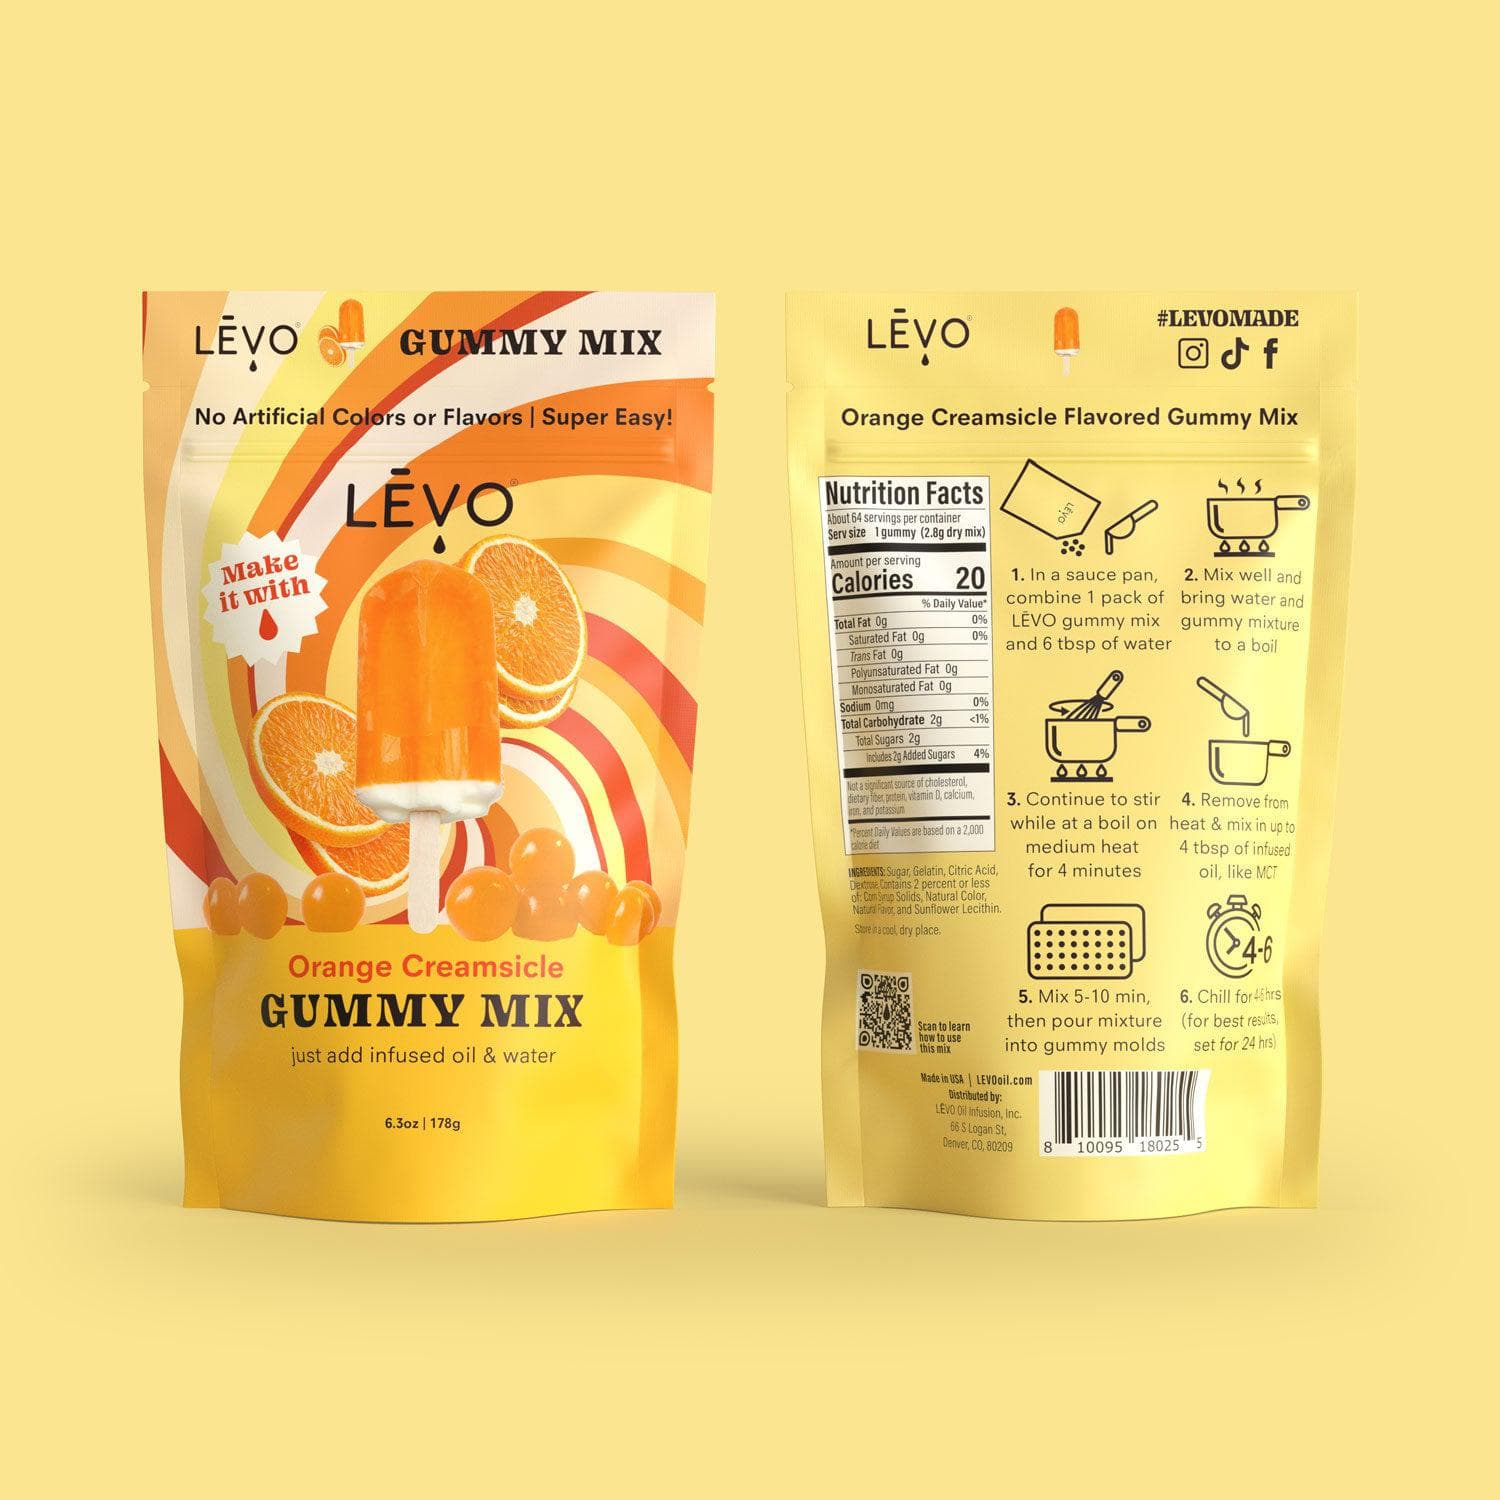 LEVO gummy bags contain all the instructions and information you need to make your own edibles in your kitchen. Save money by buying homemade.